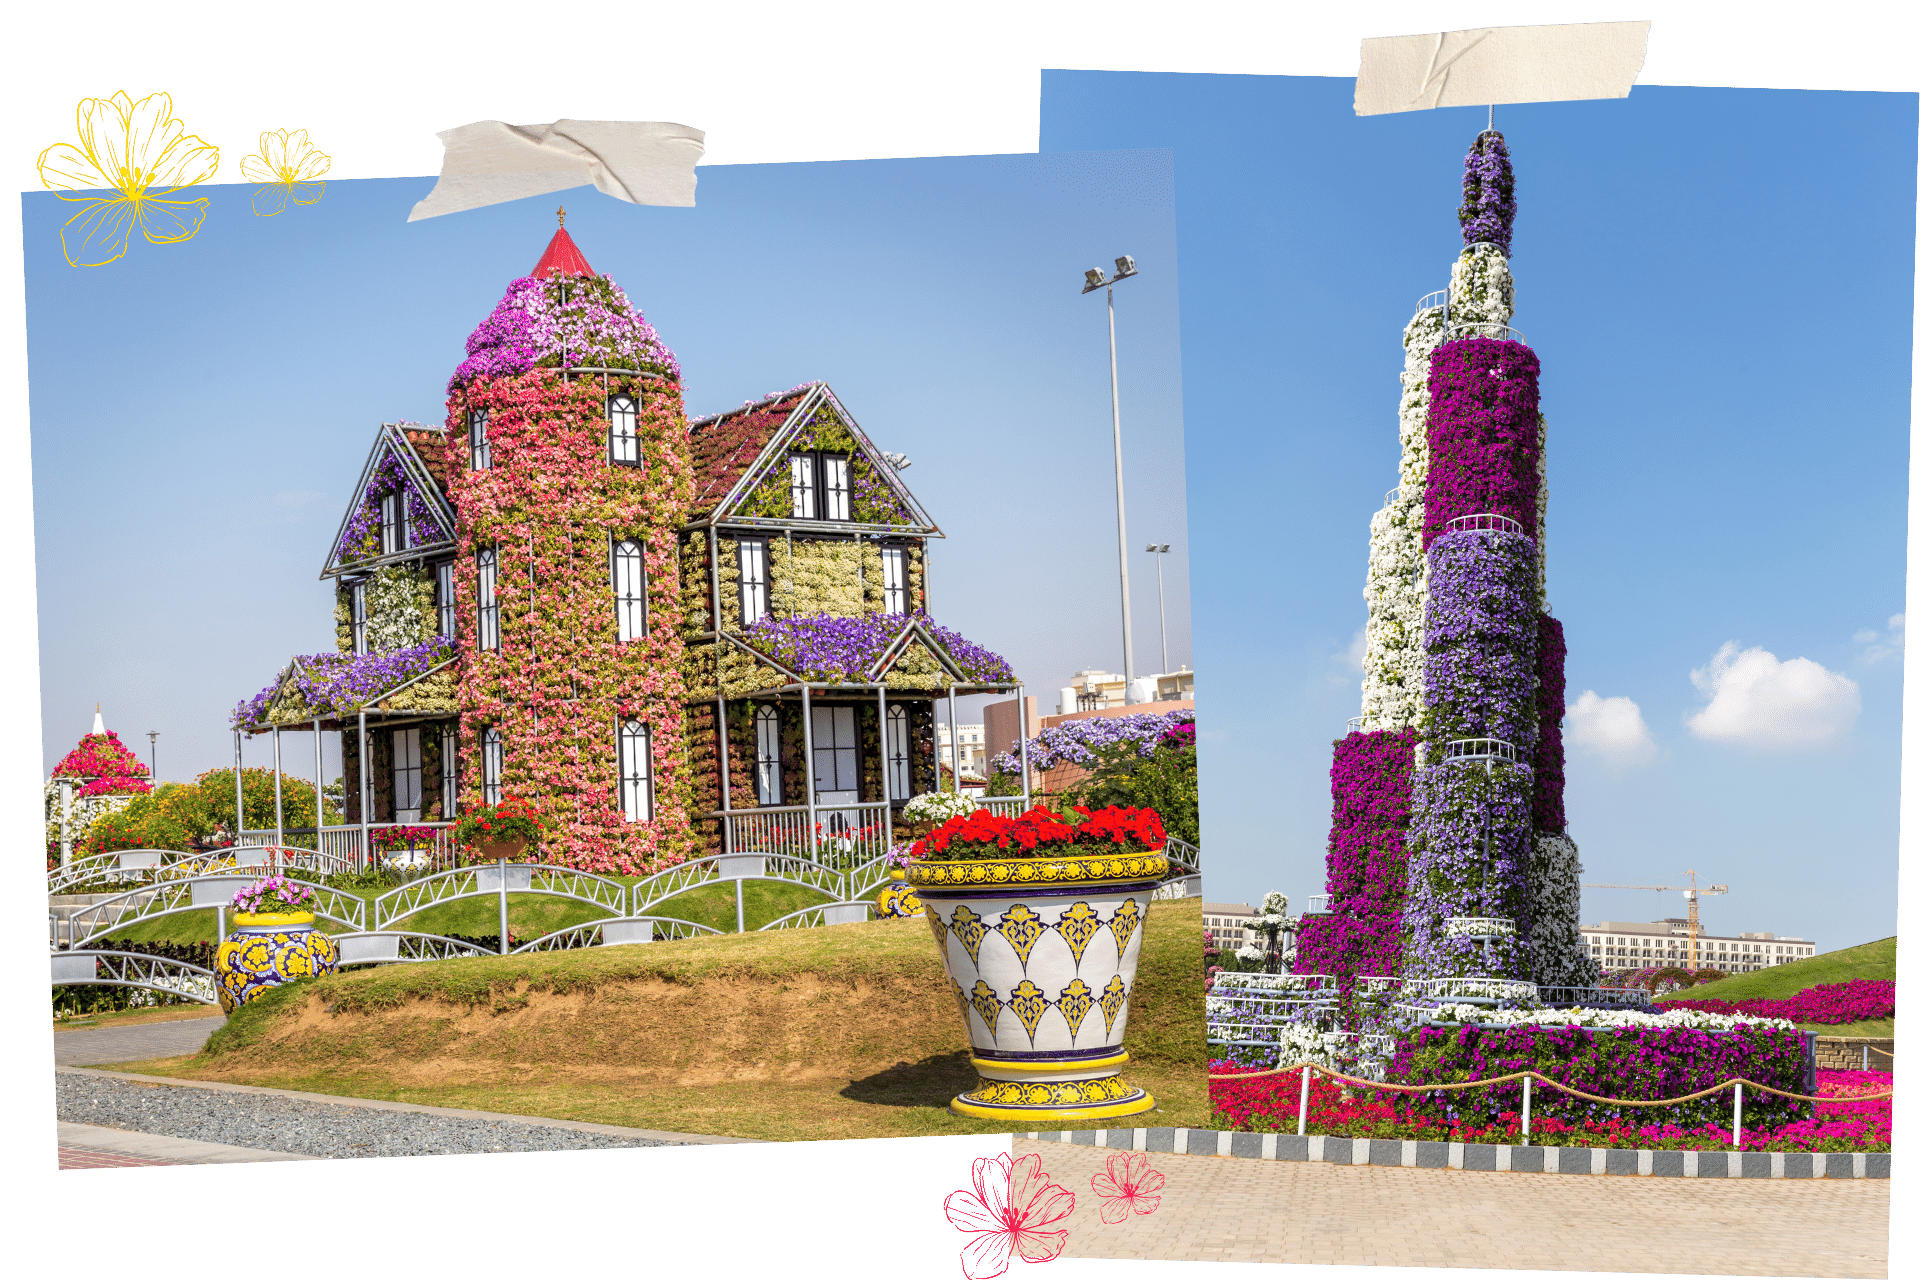 The Dubai Miracle Garden is one of Dubai's hidden gems. Two images, scrapbook style, show two structures built from flowers, one a traditional American home with a wrap-around porch, the other a miniature Burj Khalifa.